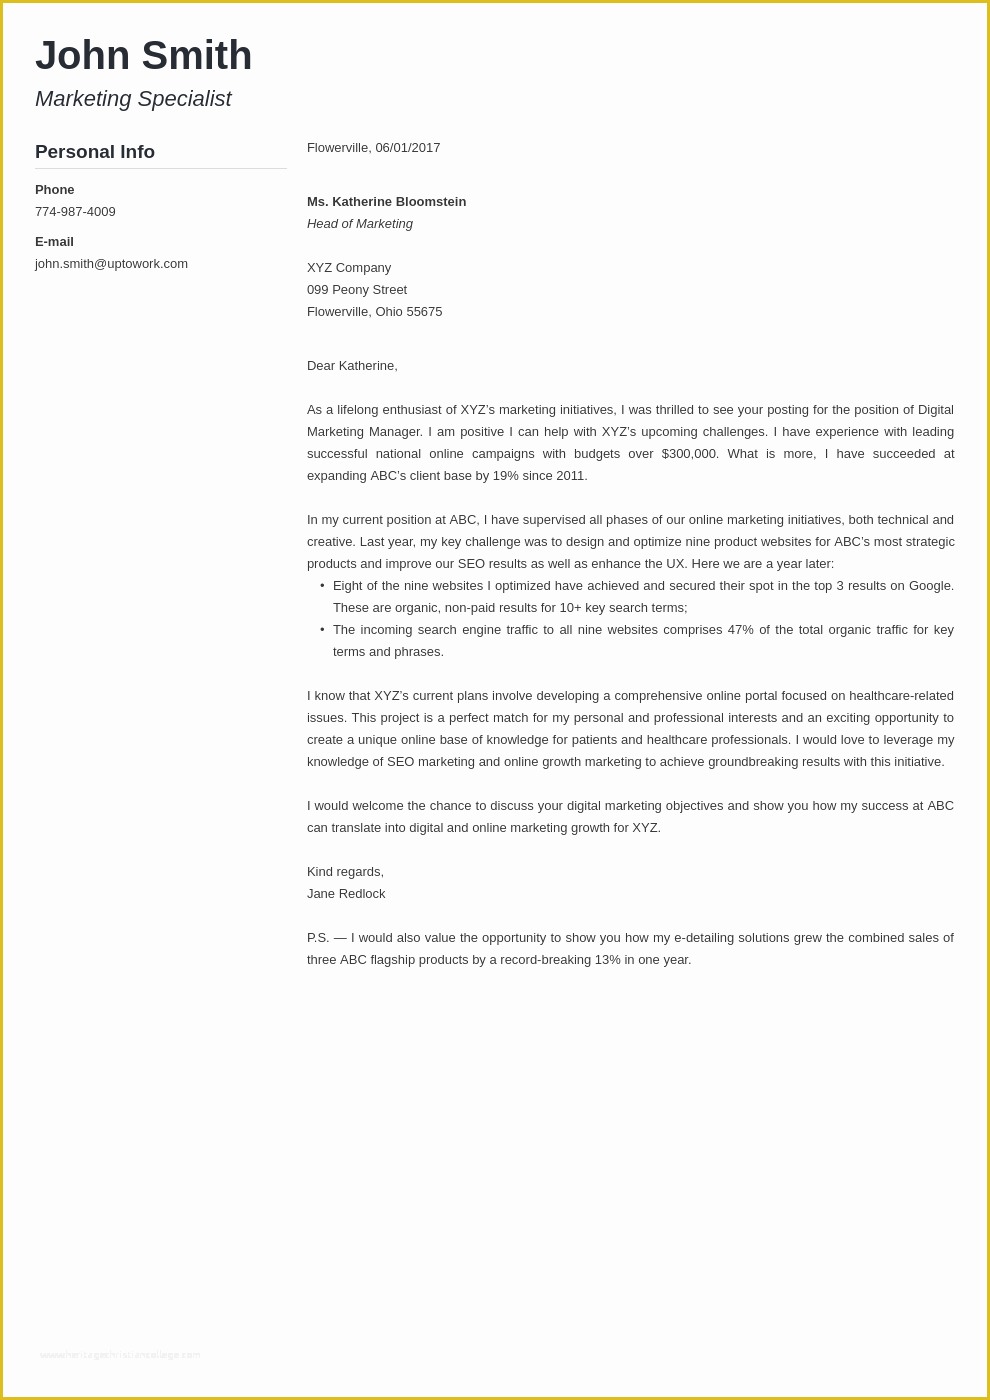 Free Resume and Cover Letter Templates Of 20 Cover Letter Templates Fill them In and Download In 5